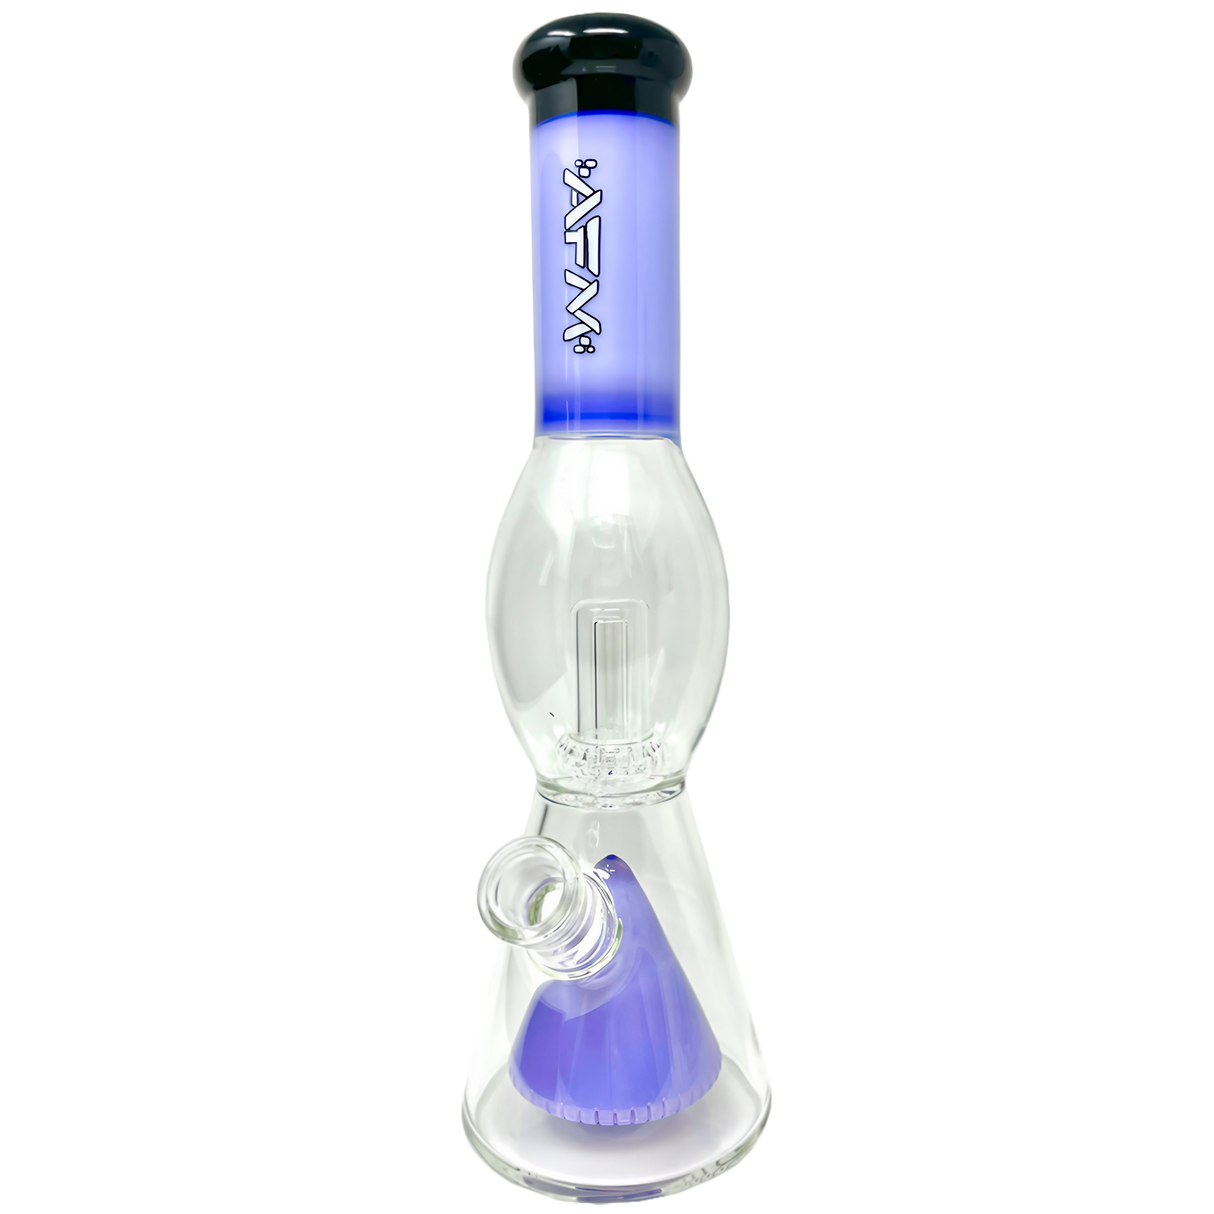 AFM - Pyramid UFO Beaker Bong in Purple - 13" with Showerhead Percolator - Front View